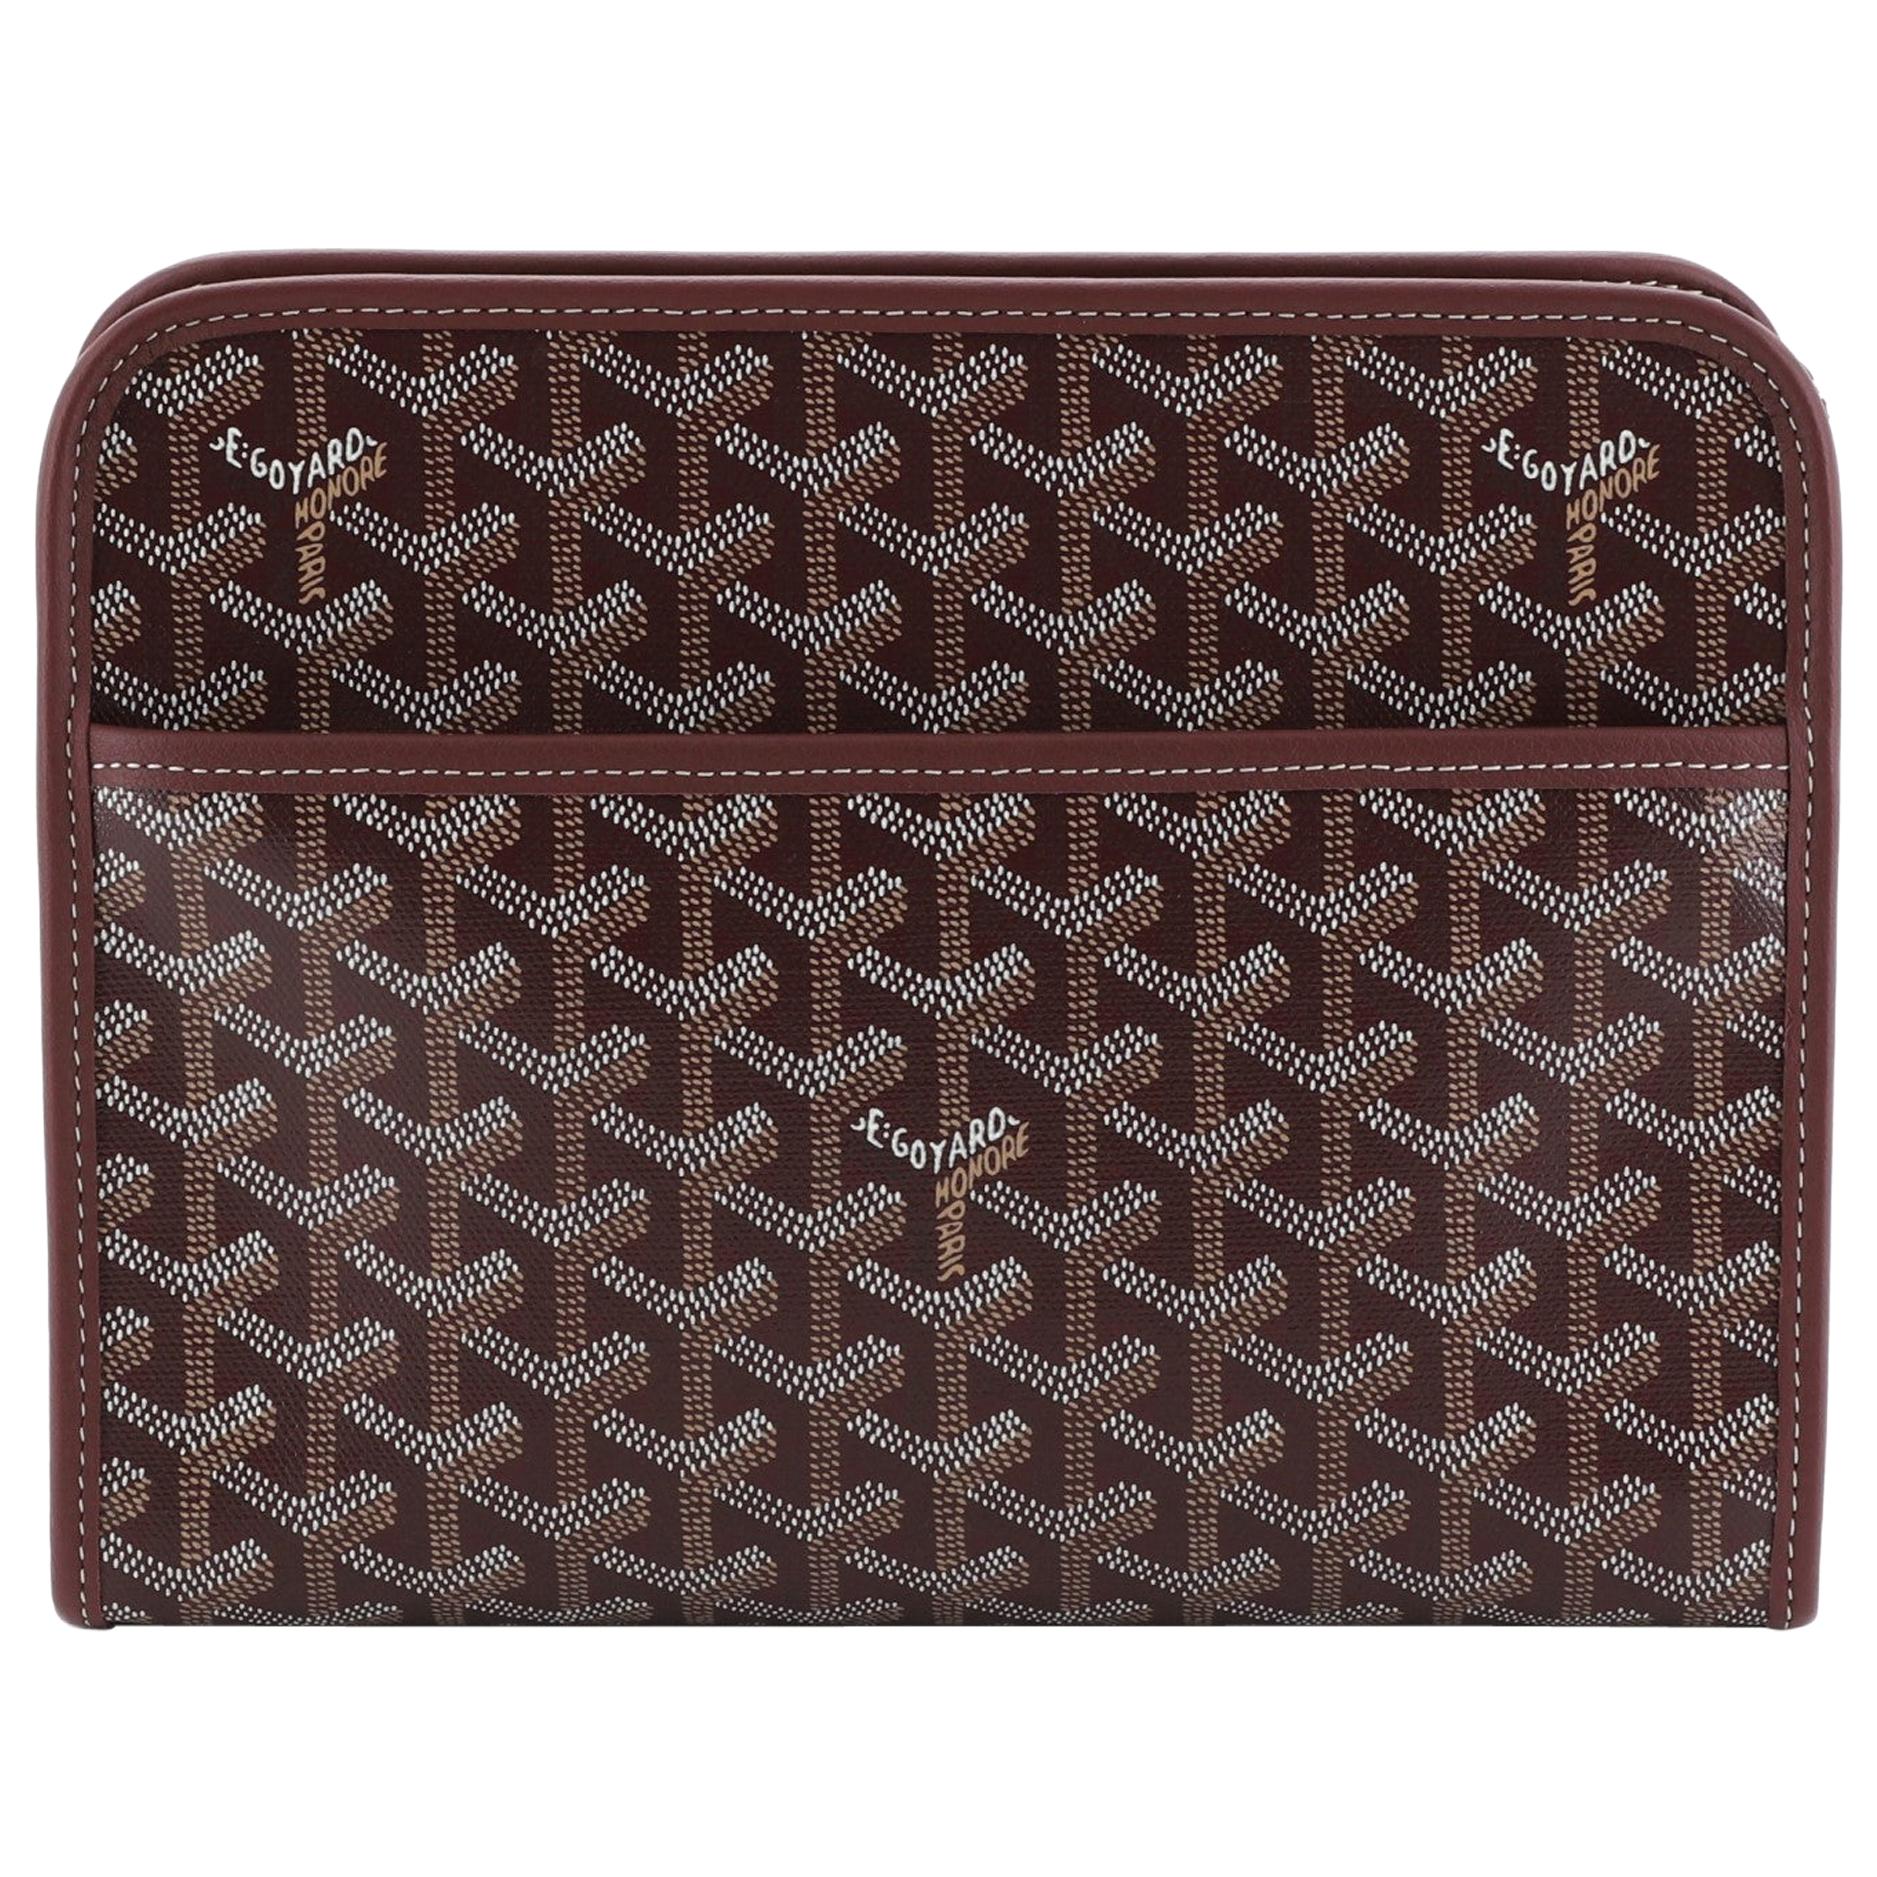 Goyard Jouvence Toiletry Pouch Coated Canvas 